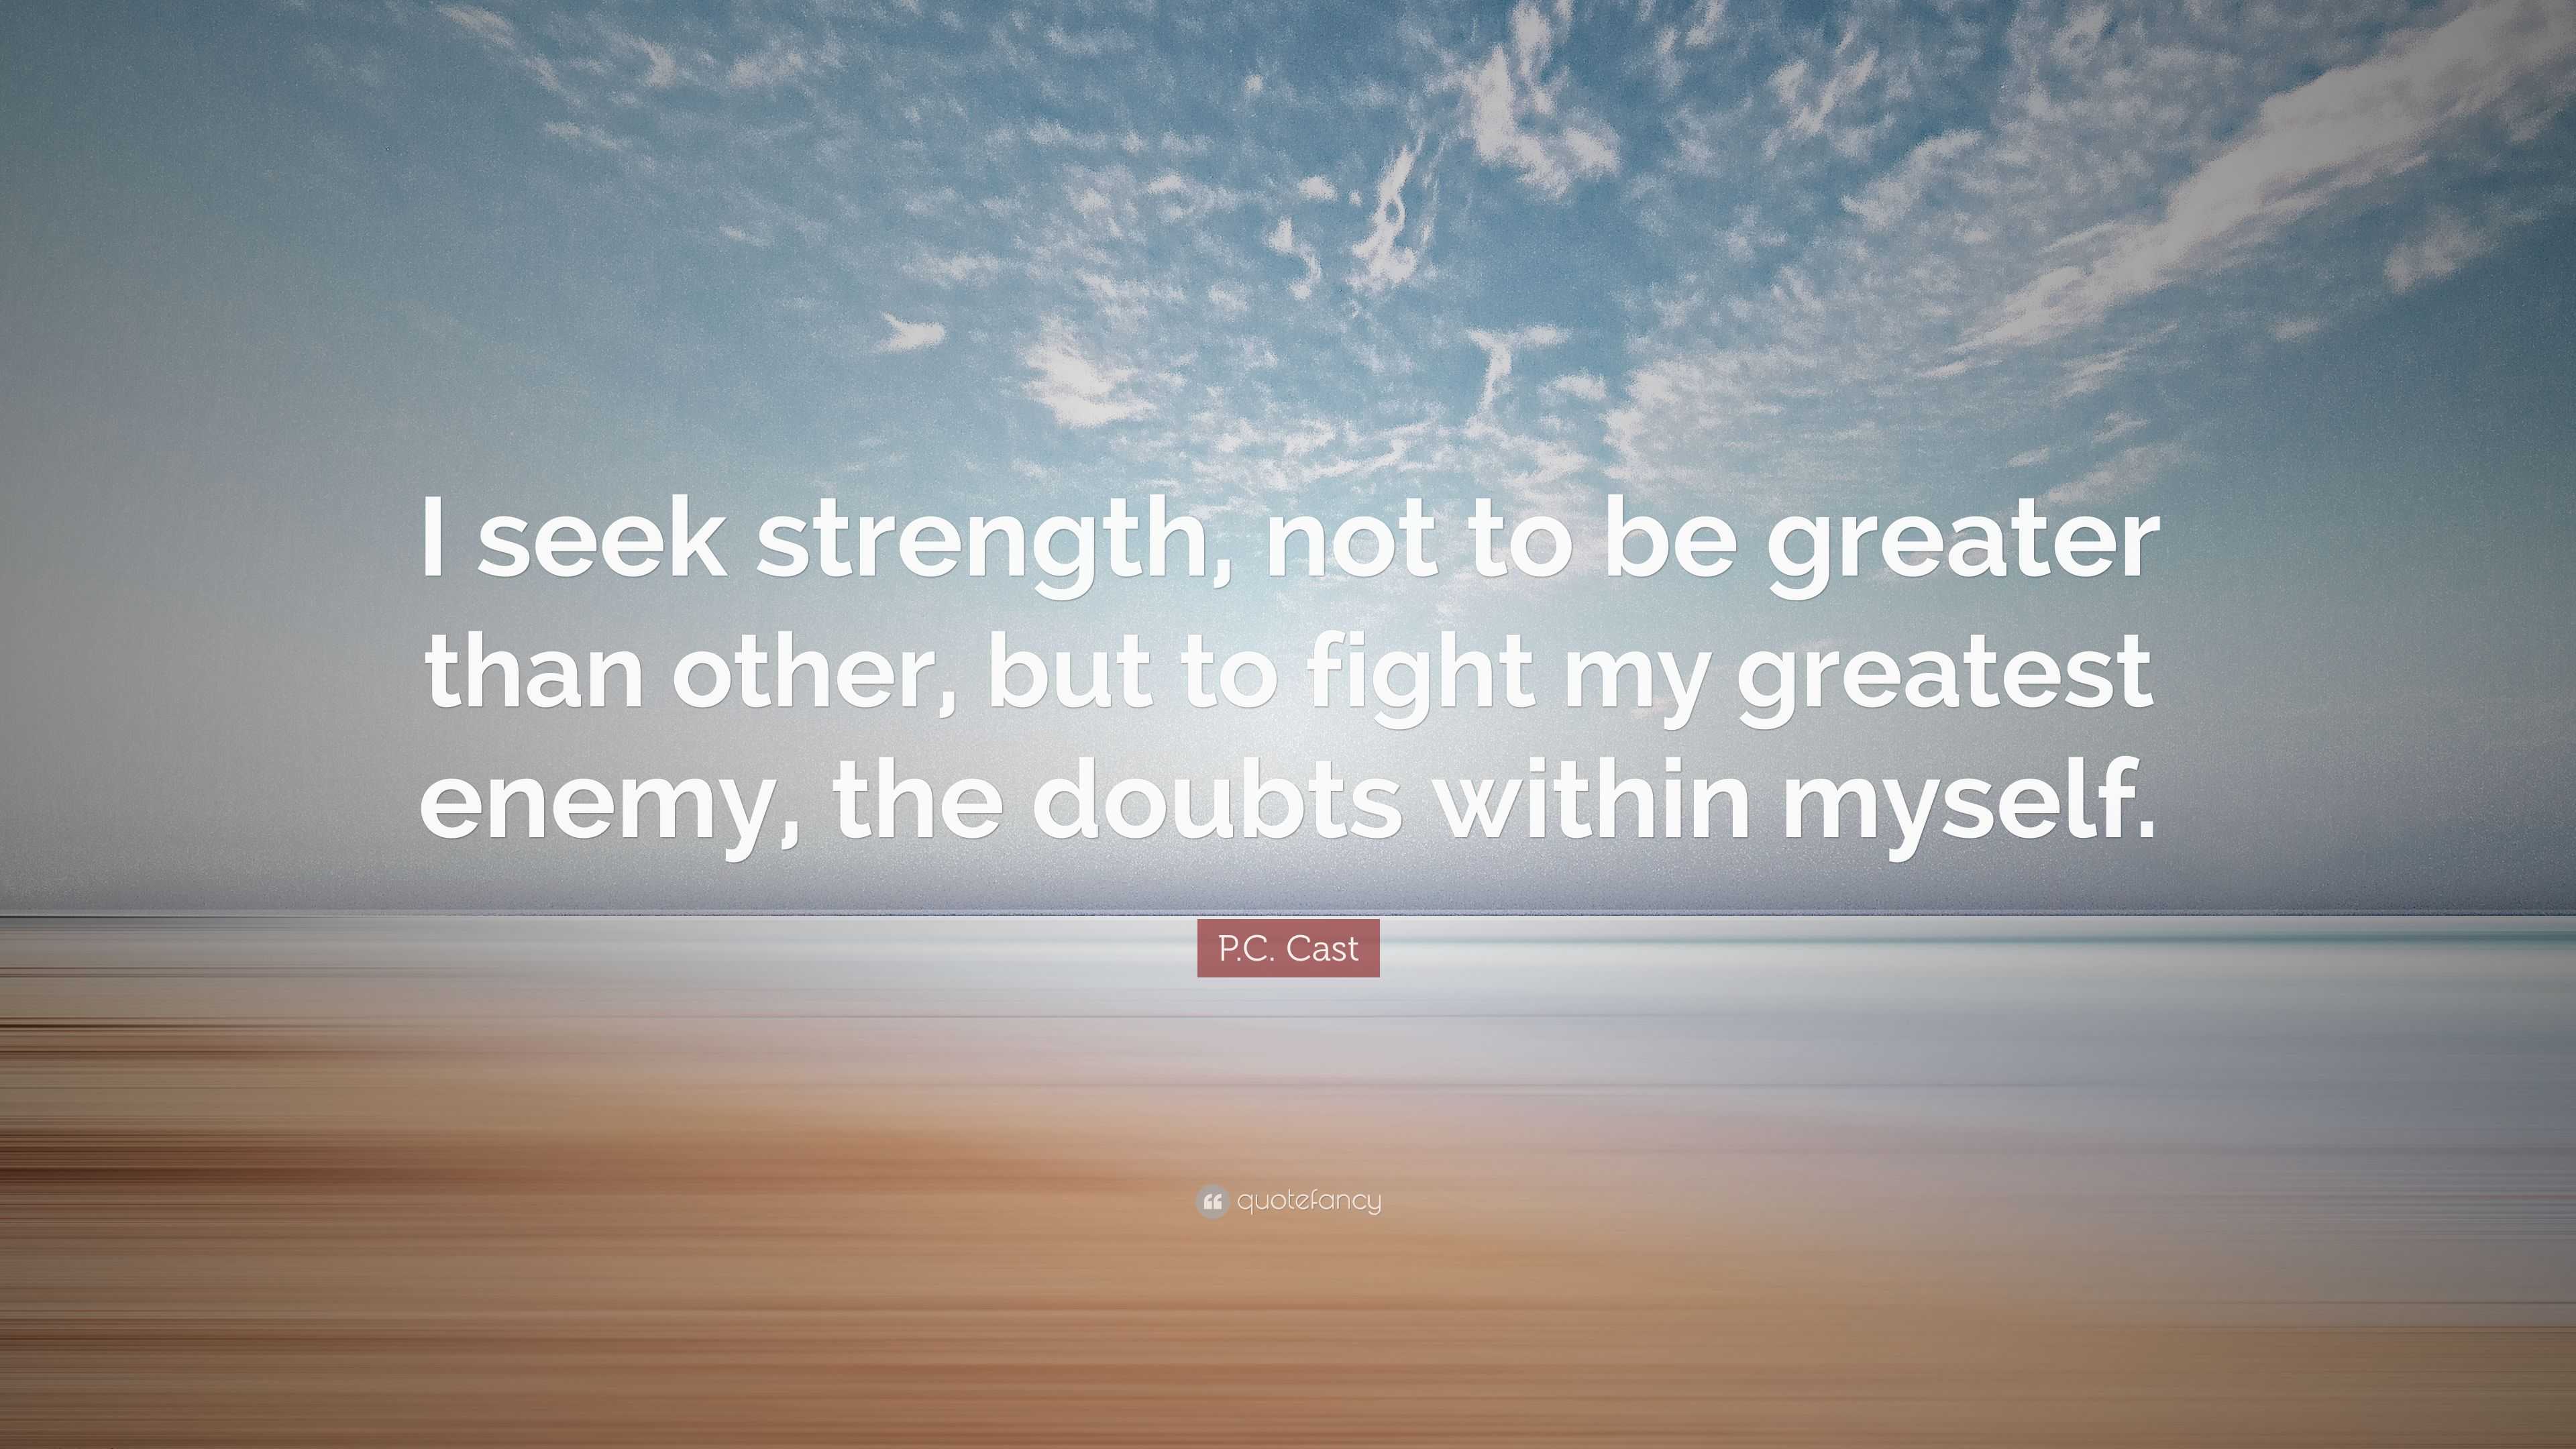 P.C. Cast Quote: “I seek strength, not to be greater than other, but to ...